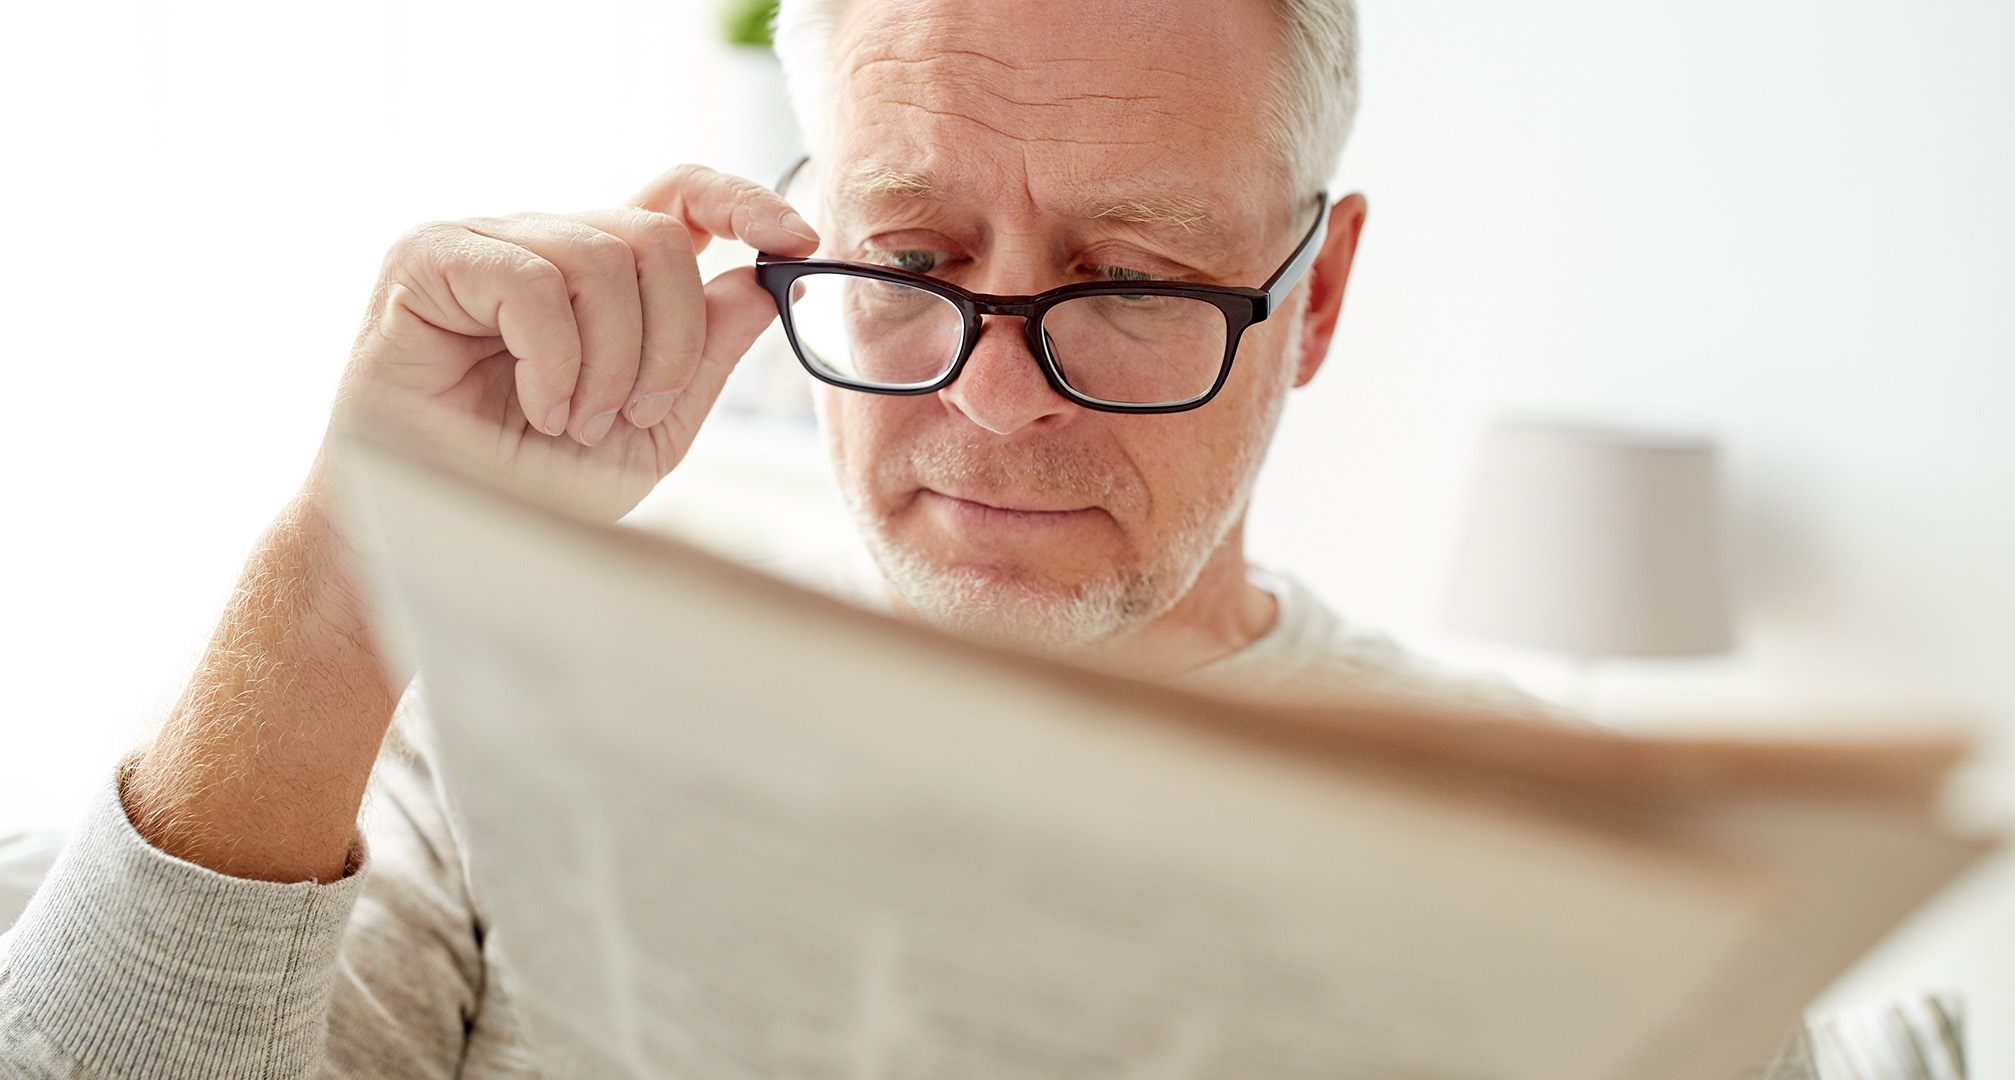 person reading and holding glasses at end of nose